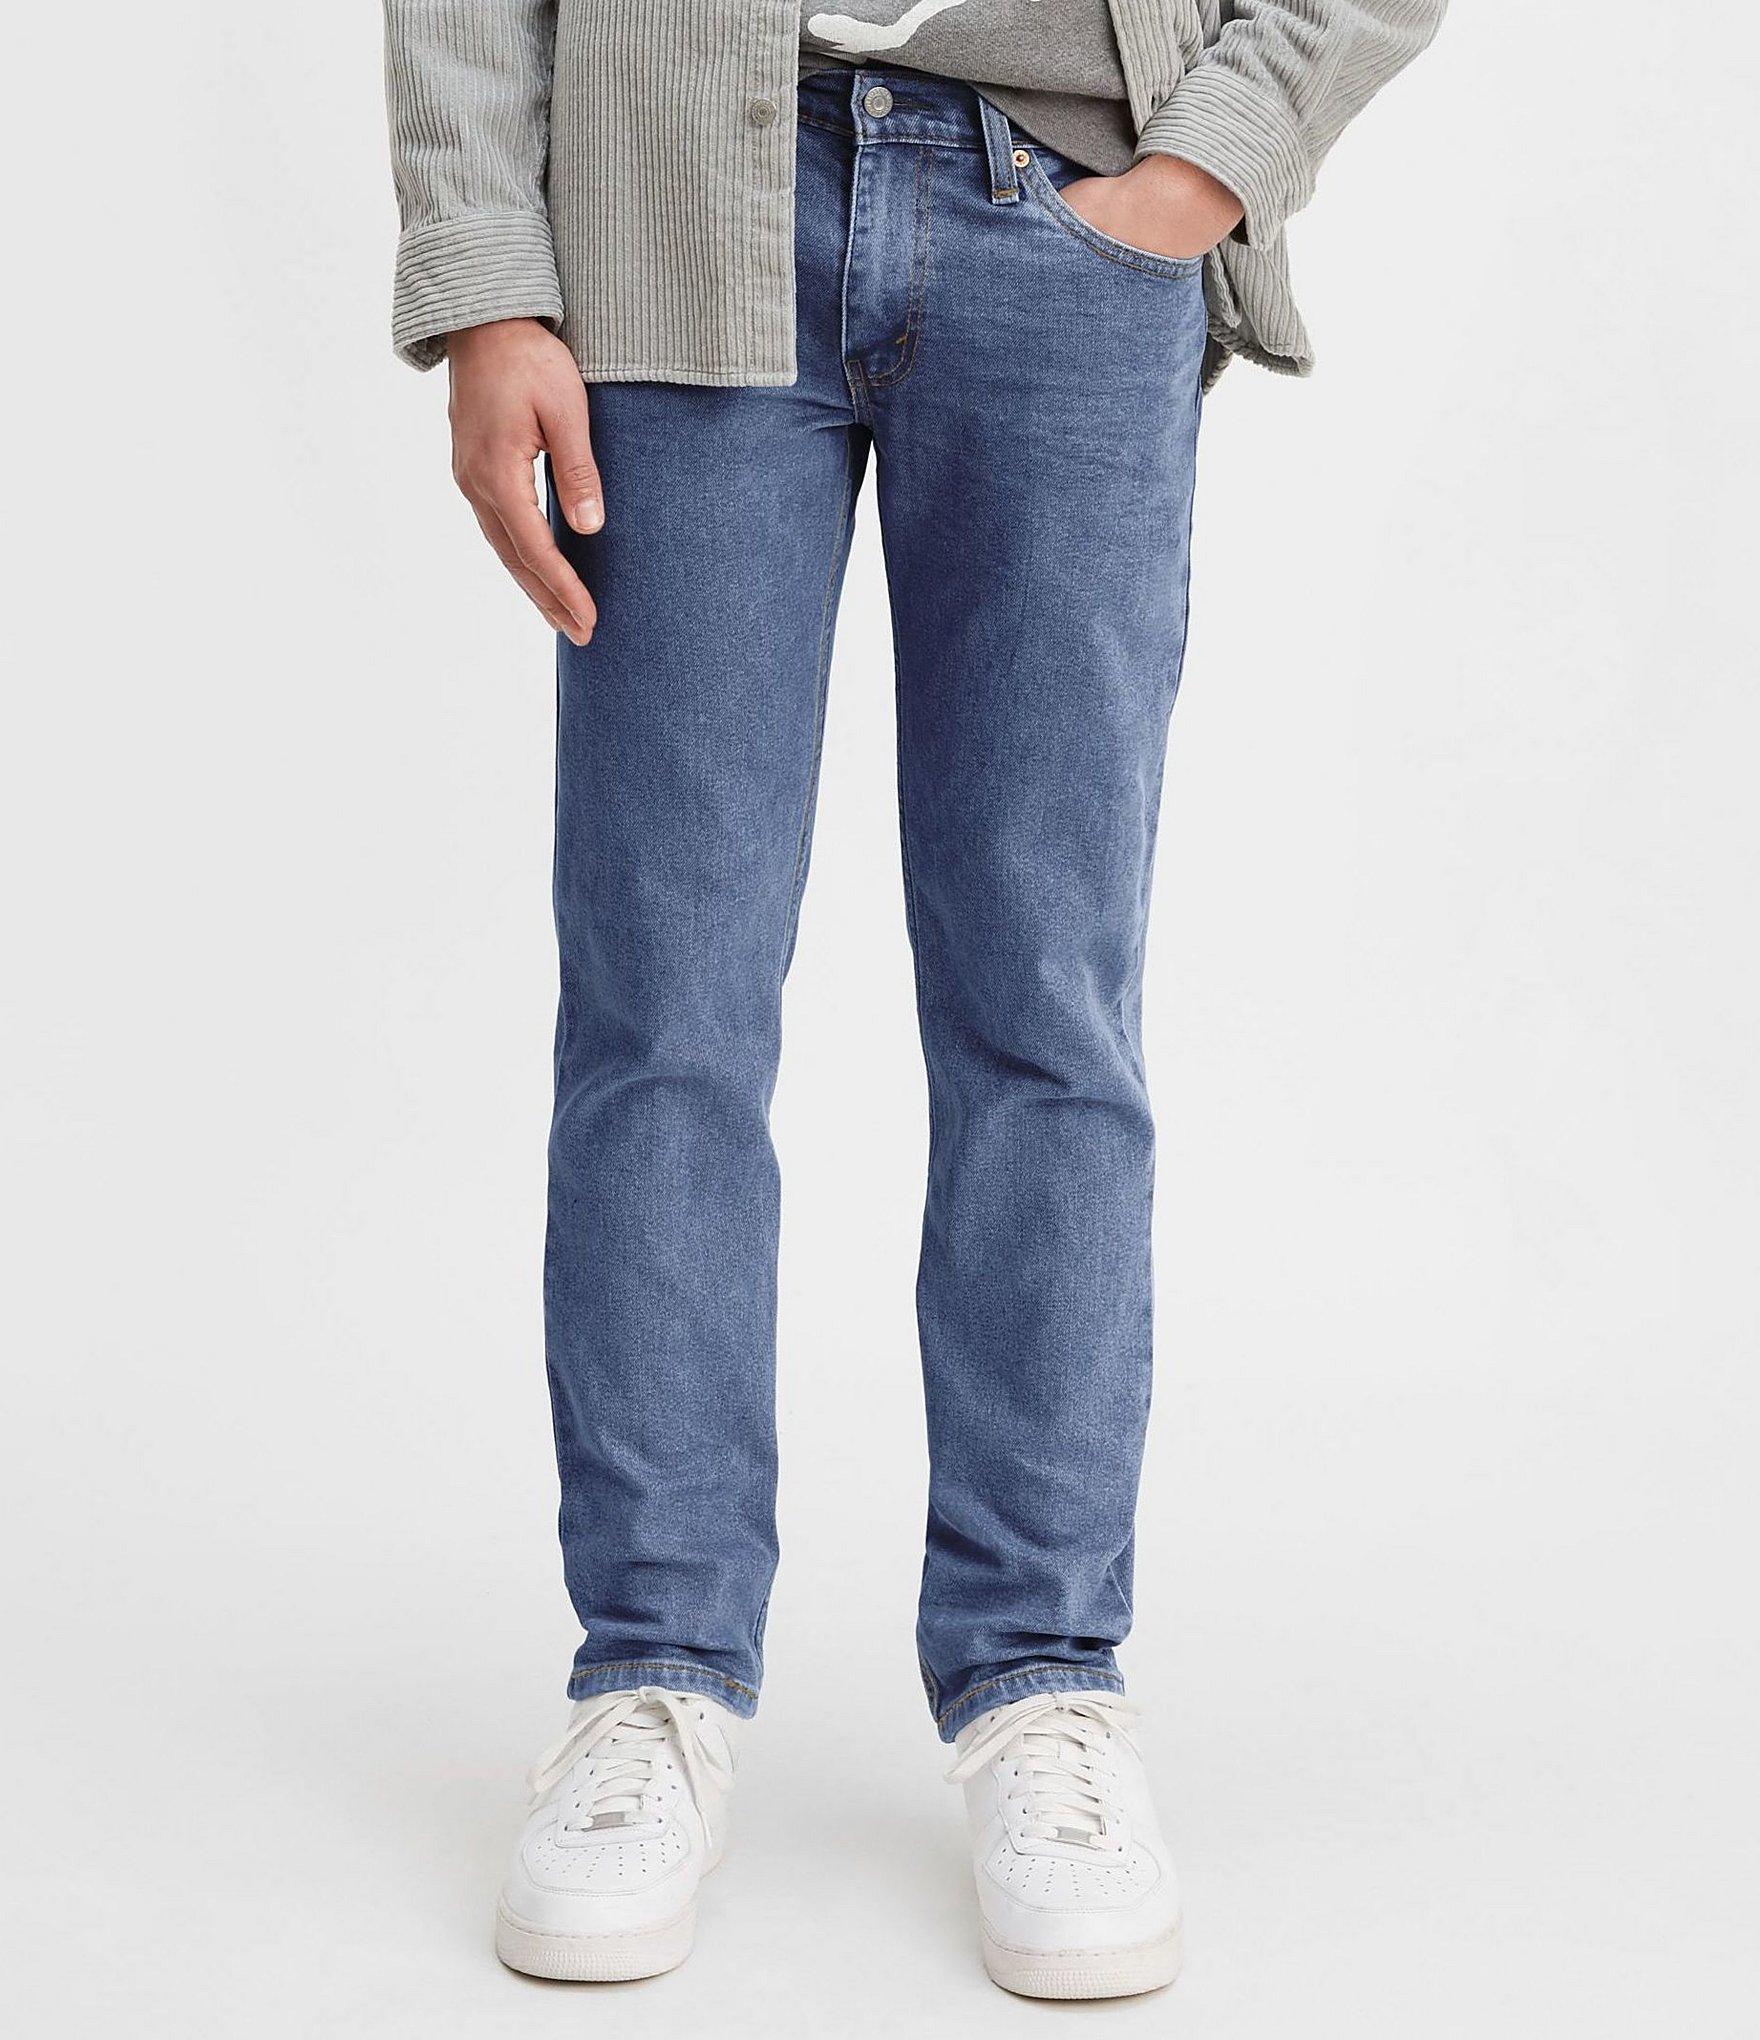 levis 511 clearance